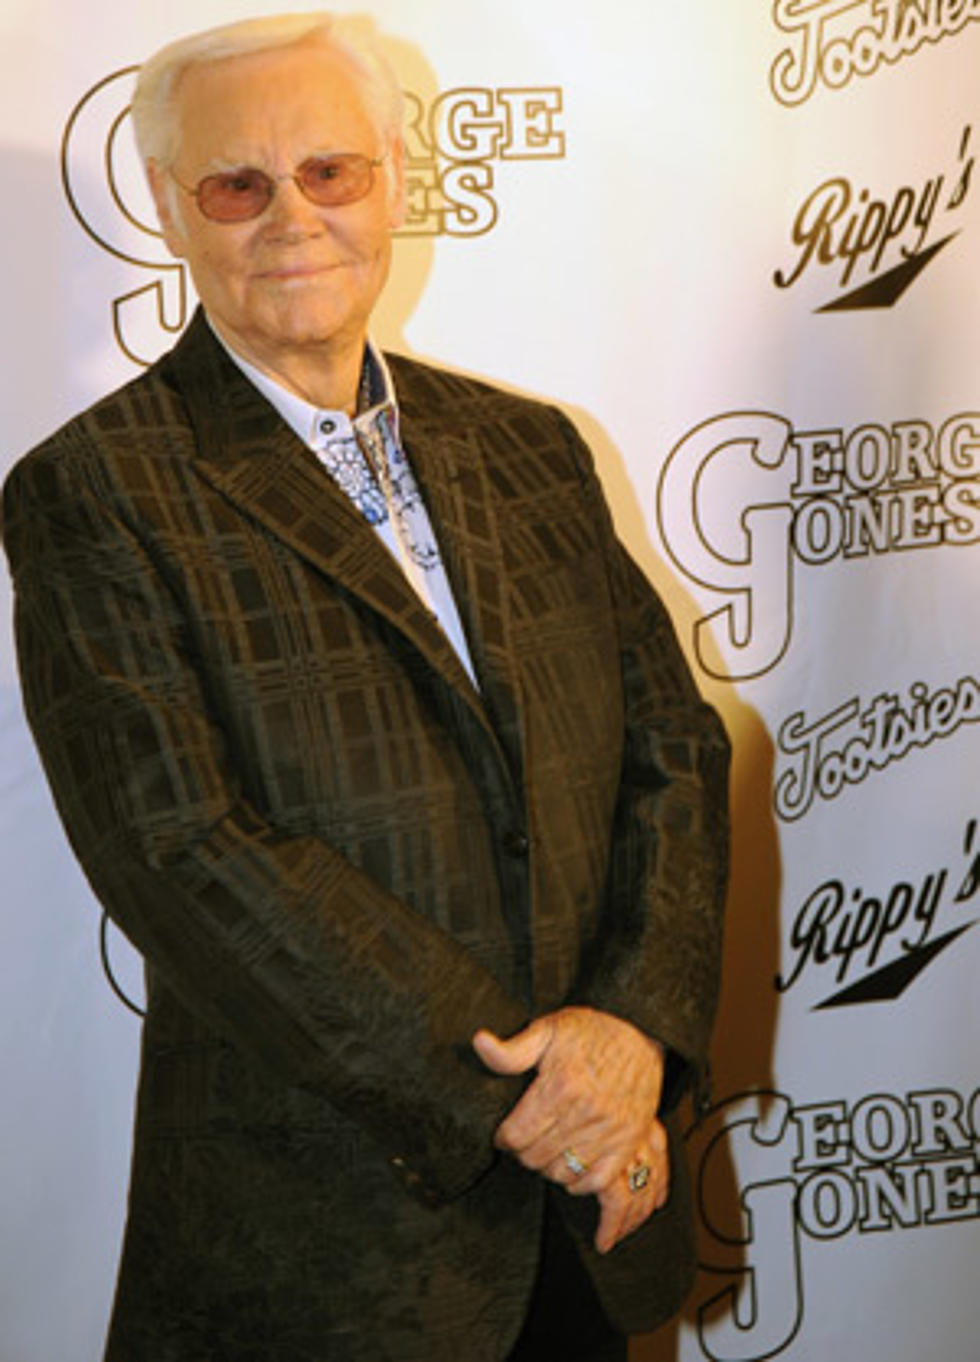 George Jones Celebrates Turning 80 With Friends and Family in Nashville